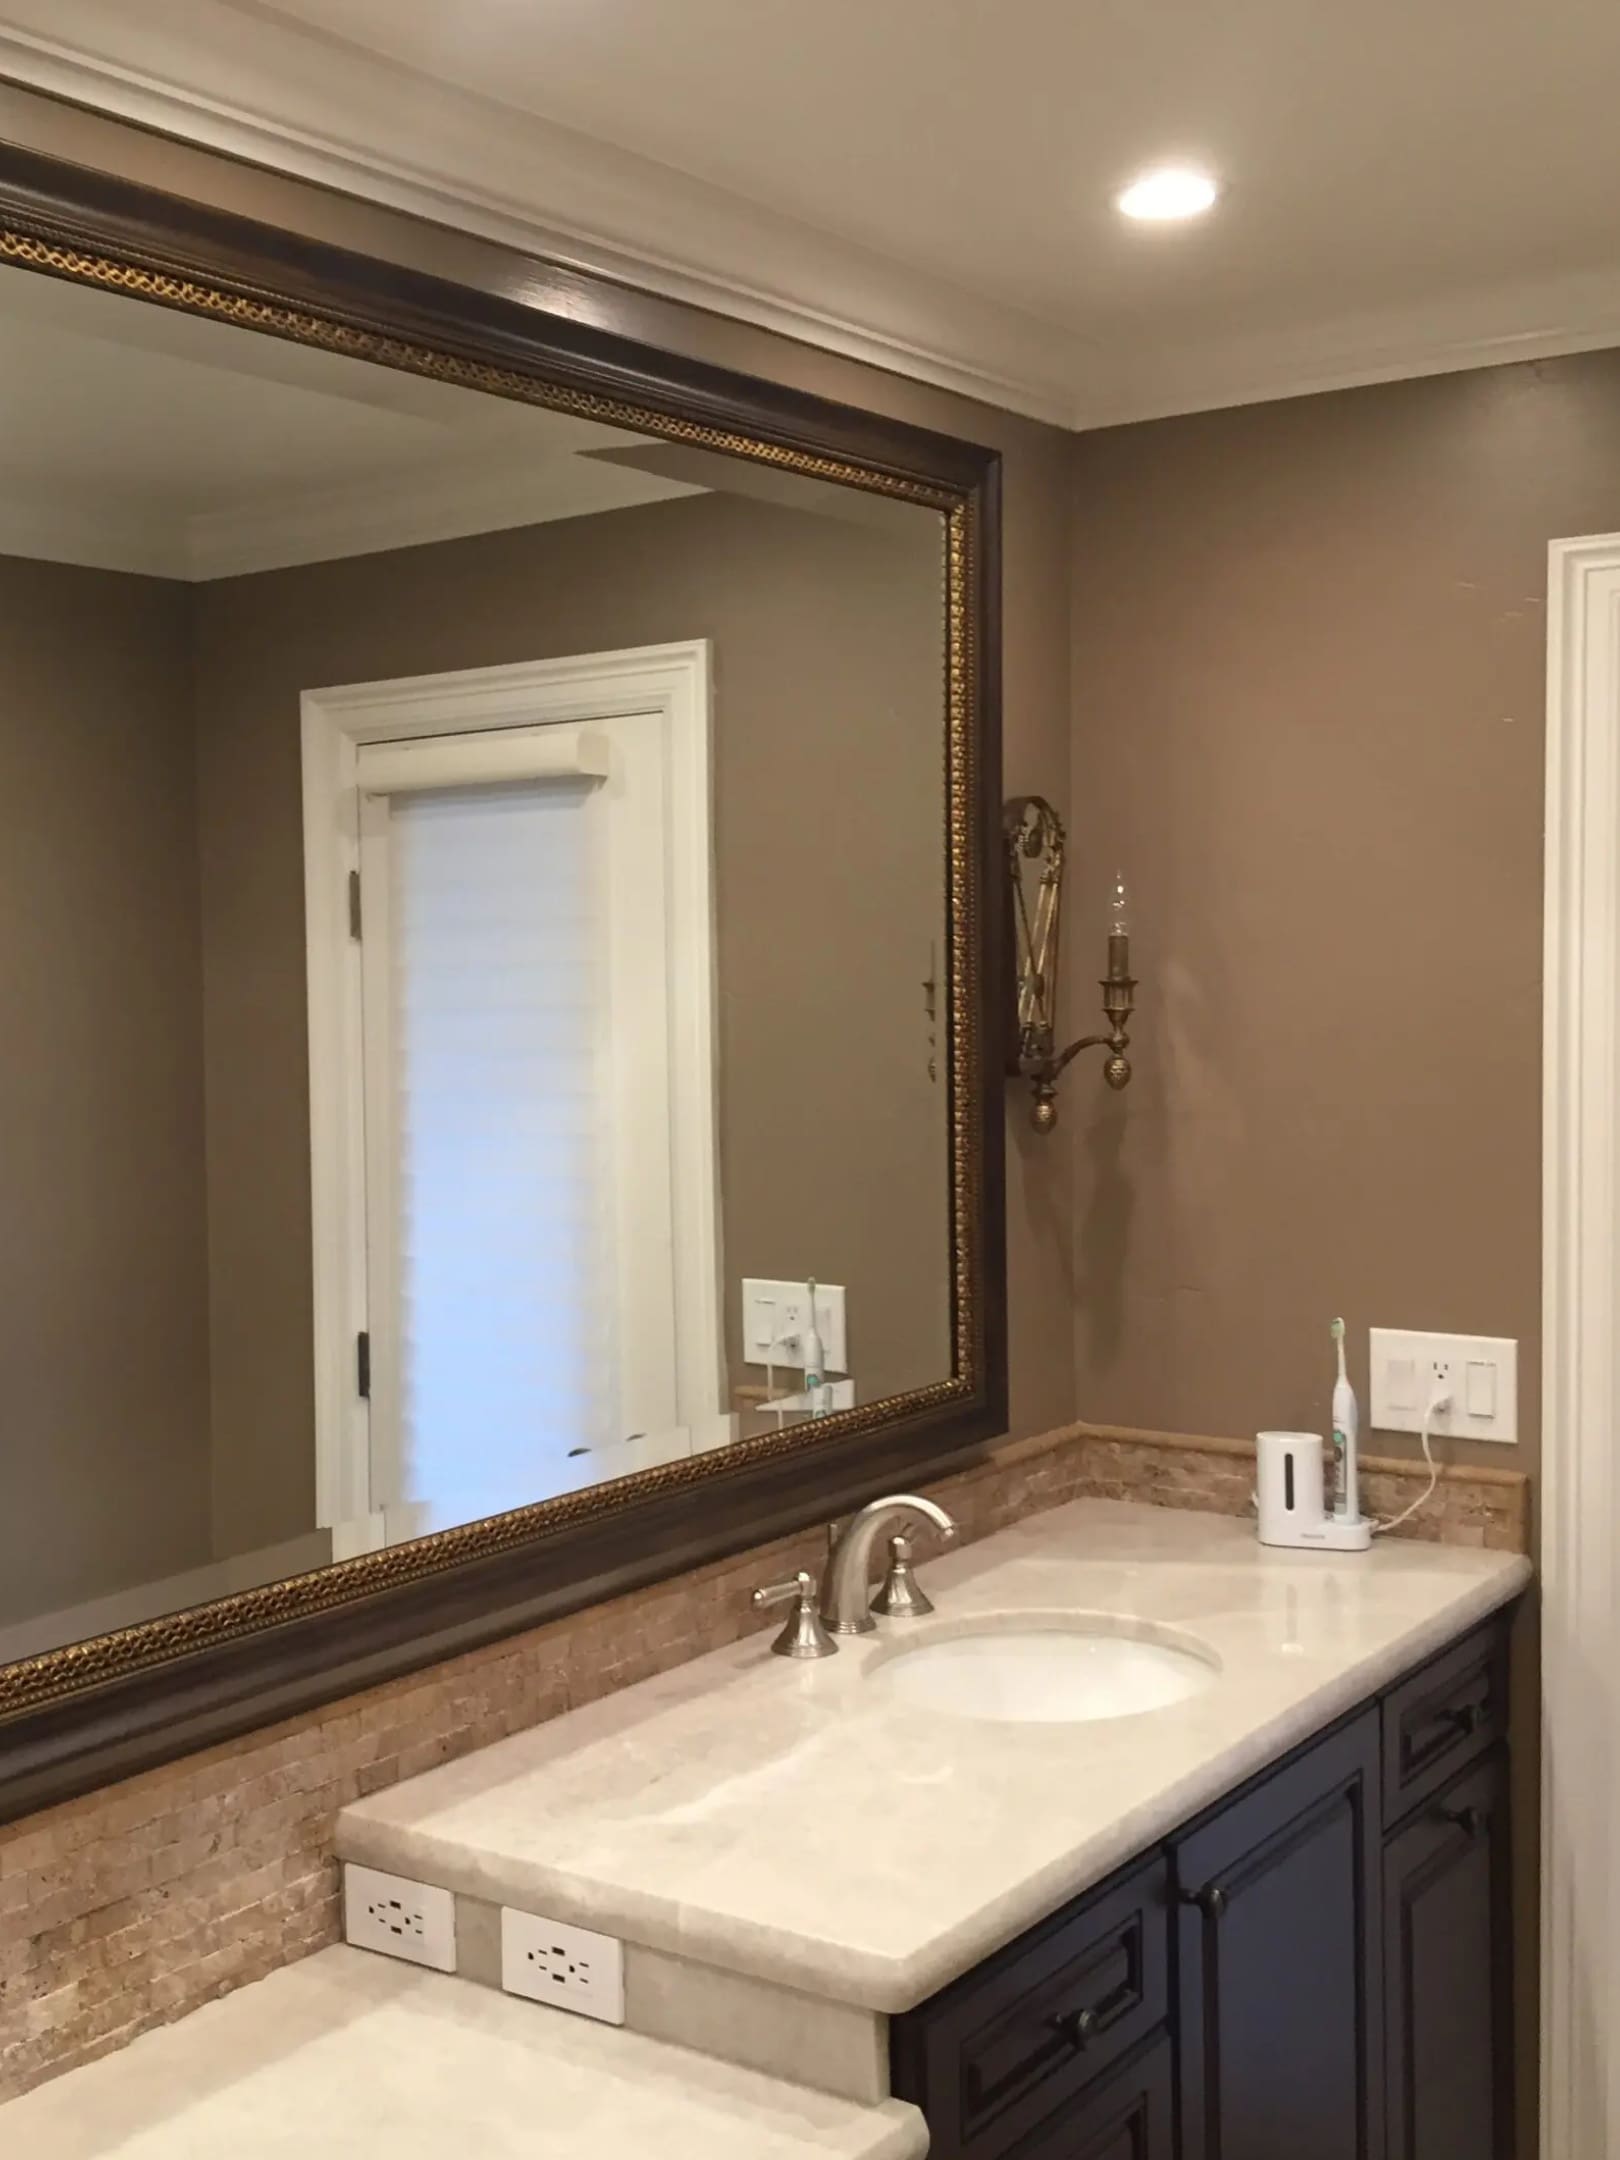 A bathroom with a large mirror and sink.